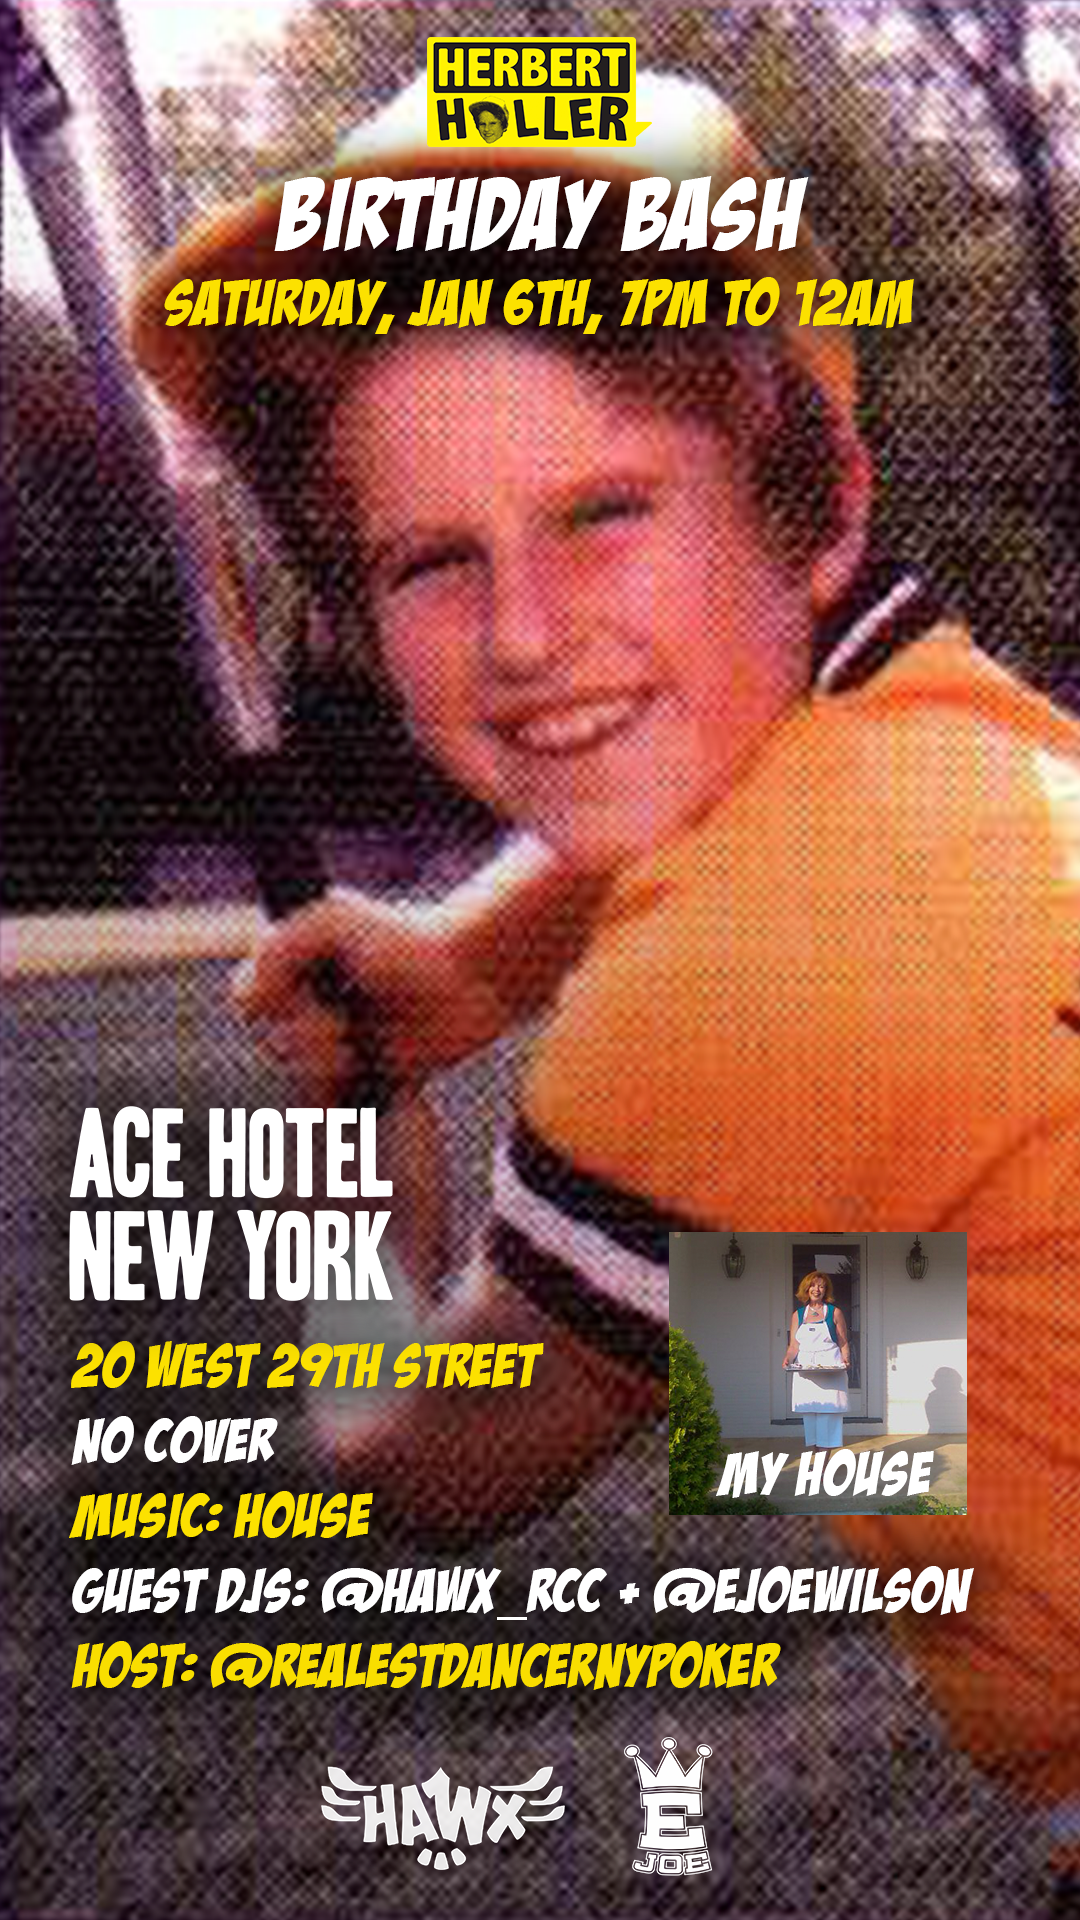 My house flyer event Ace new york